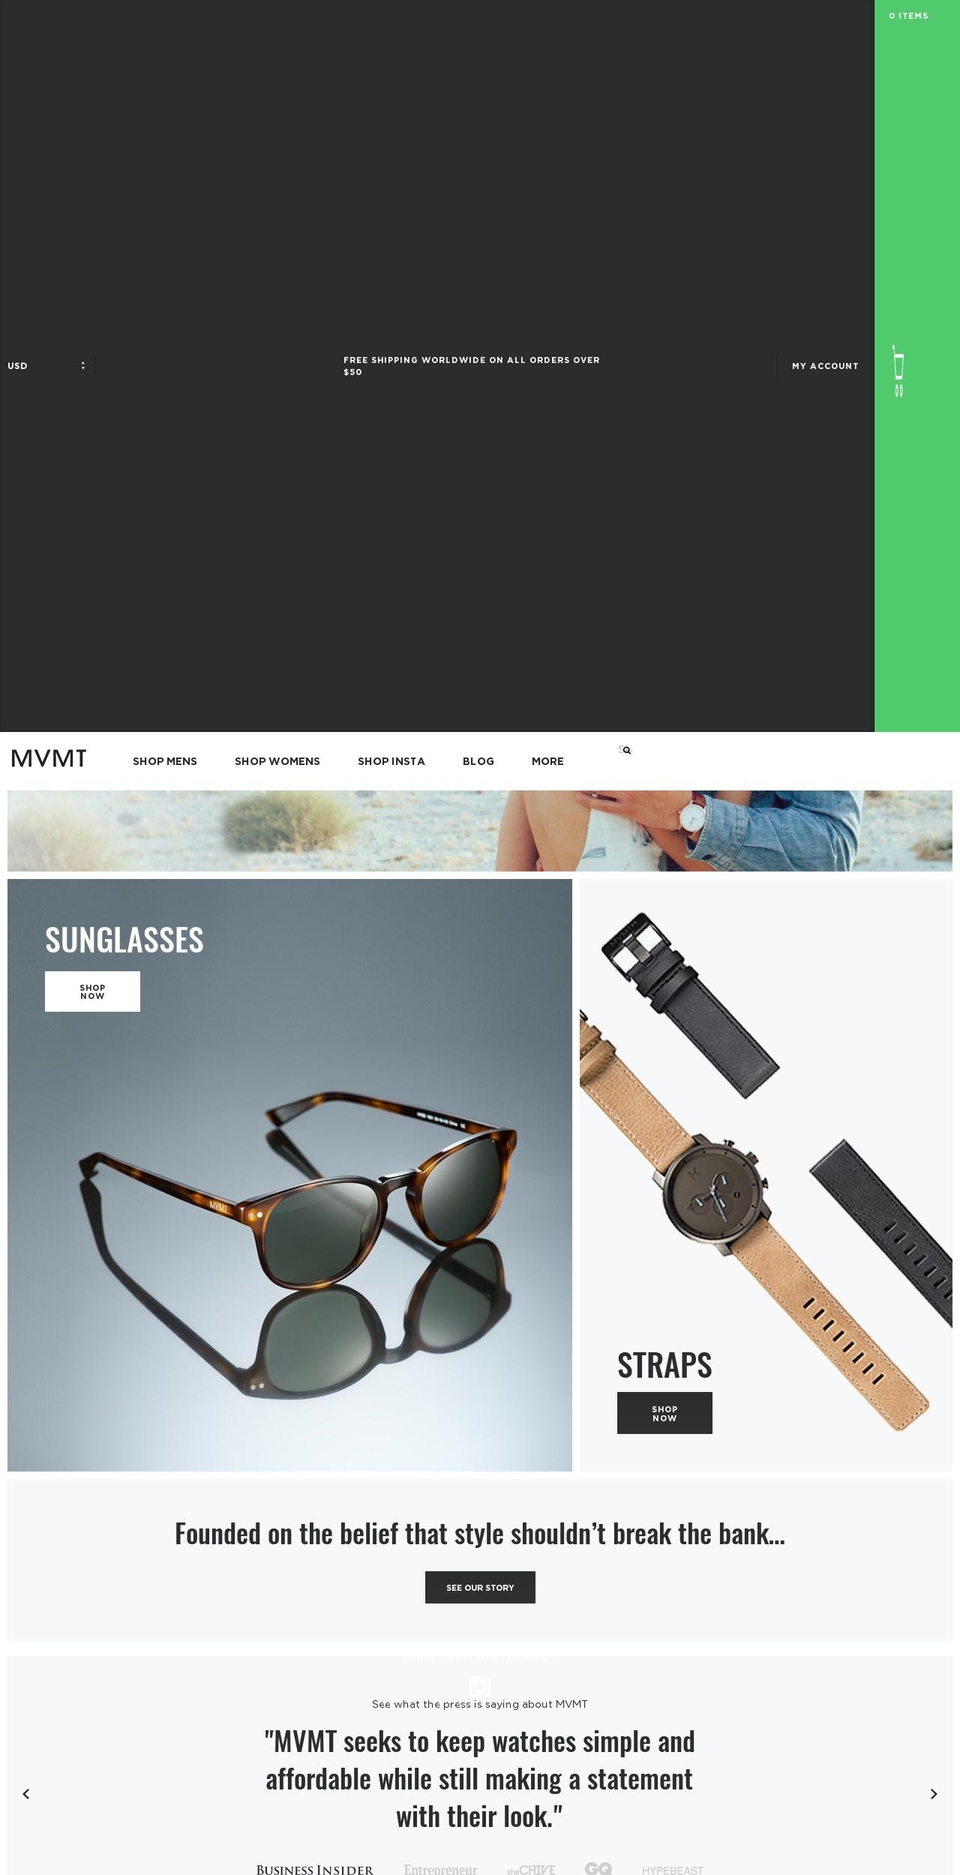 MVMT NEW - Production Shopify theme site example mvmtwatches.us